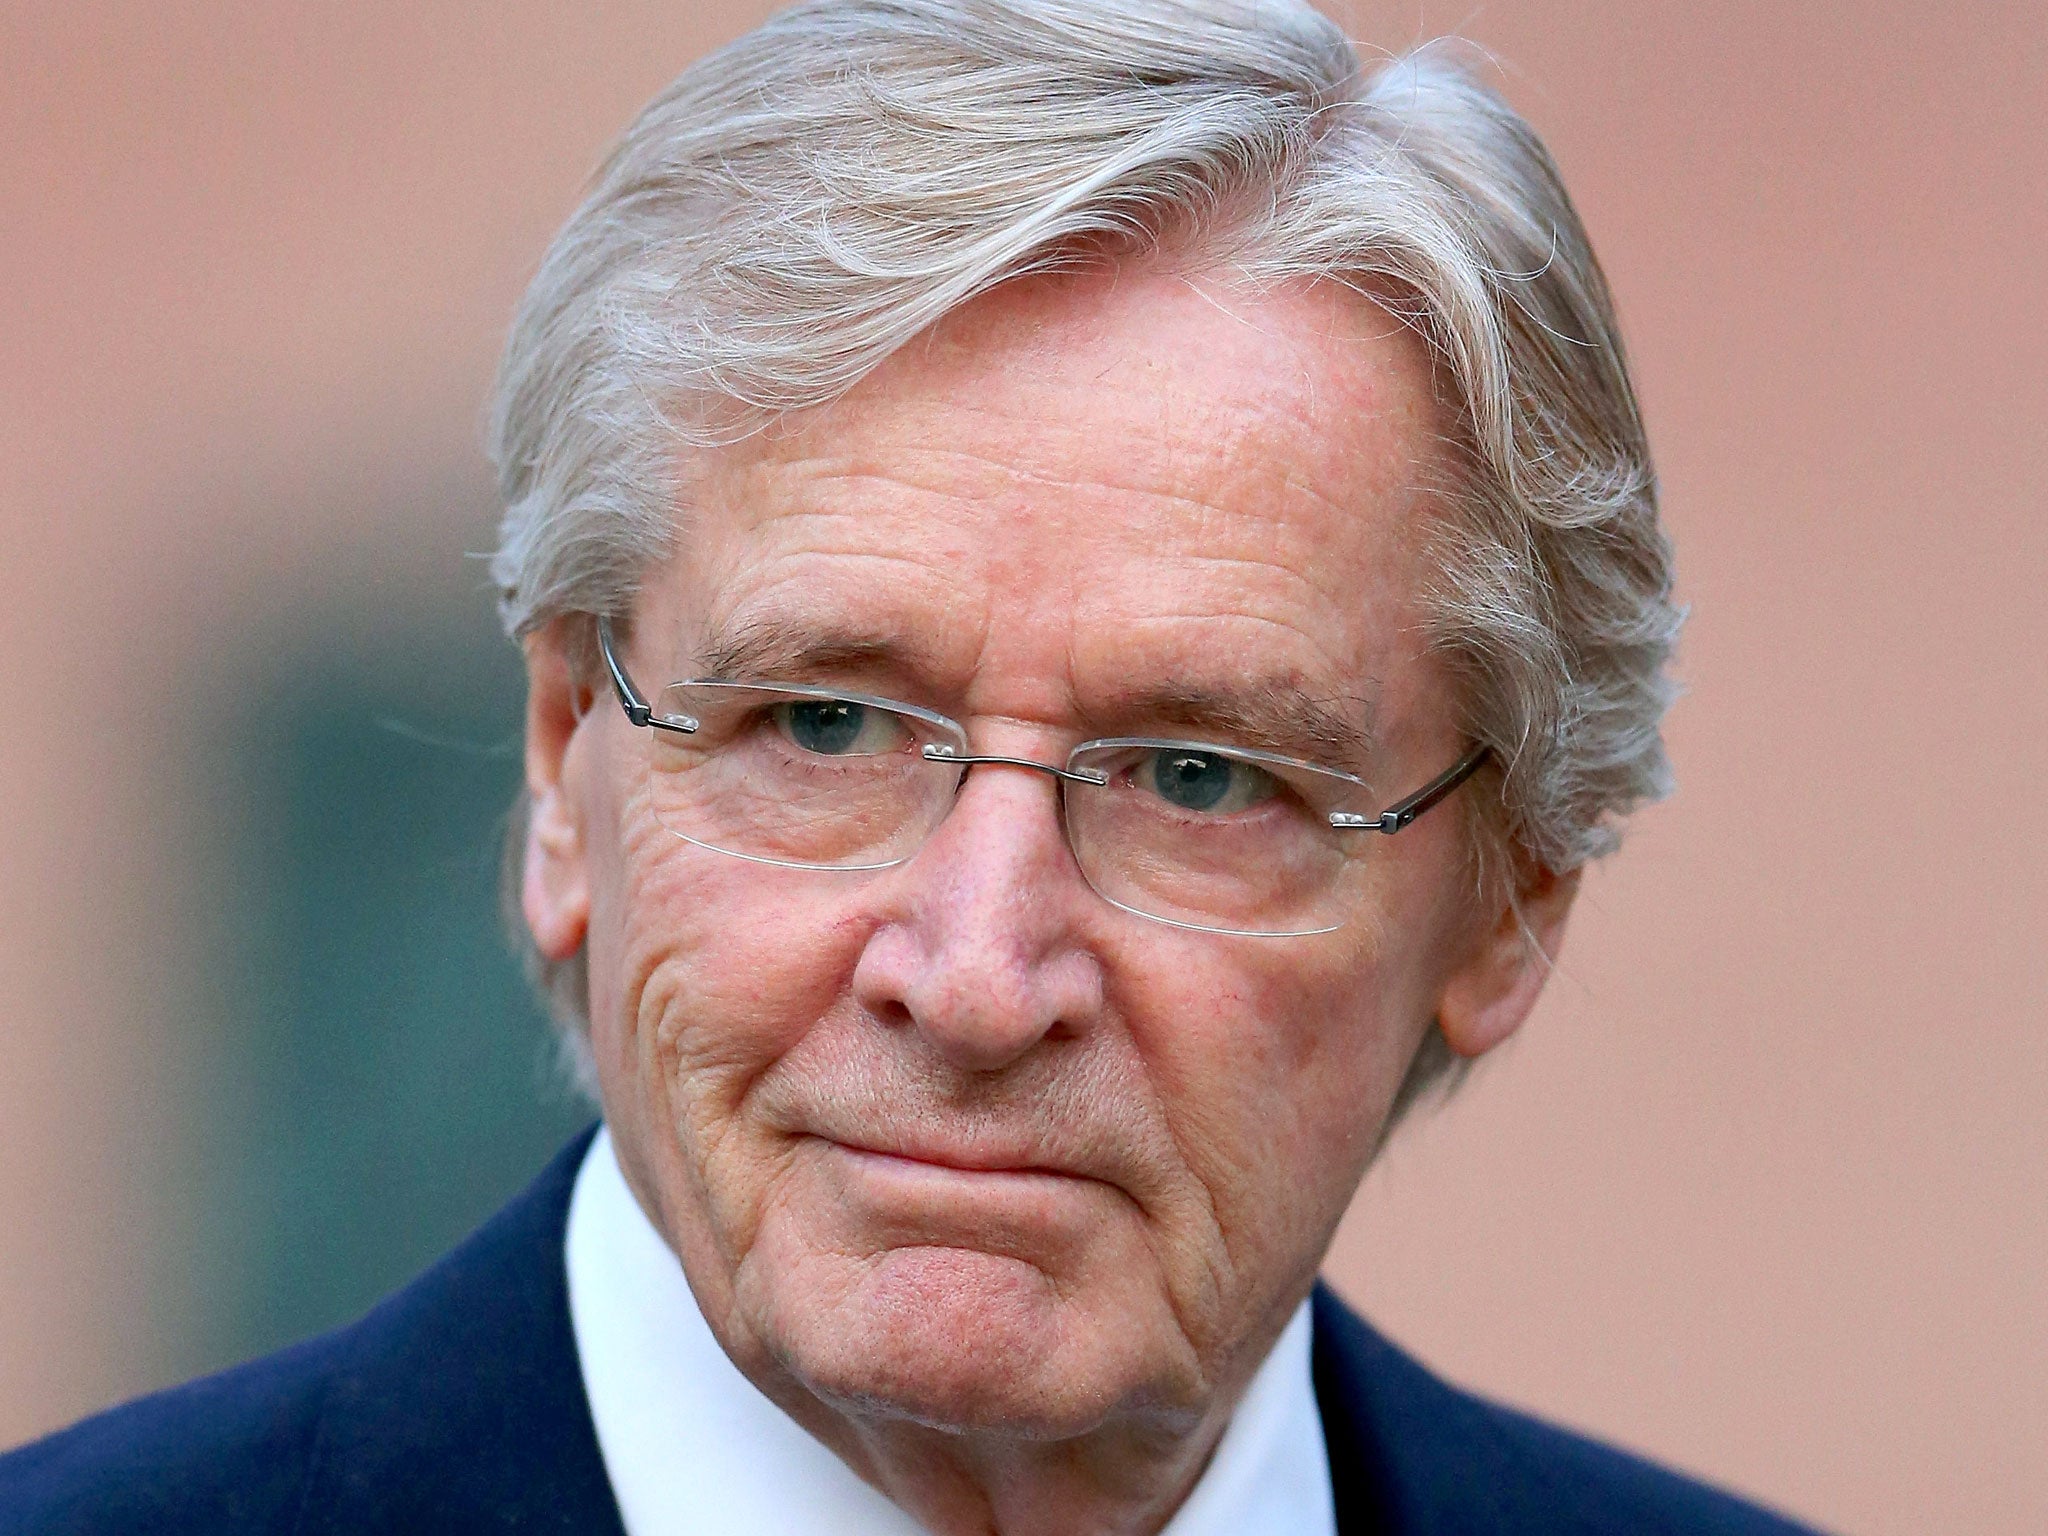 Actor William Roache was cleared of all charges on Thursday